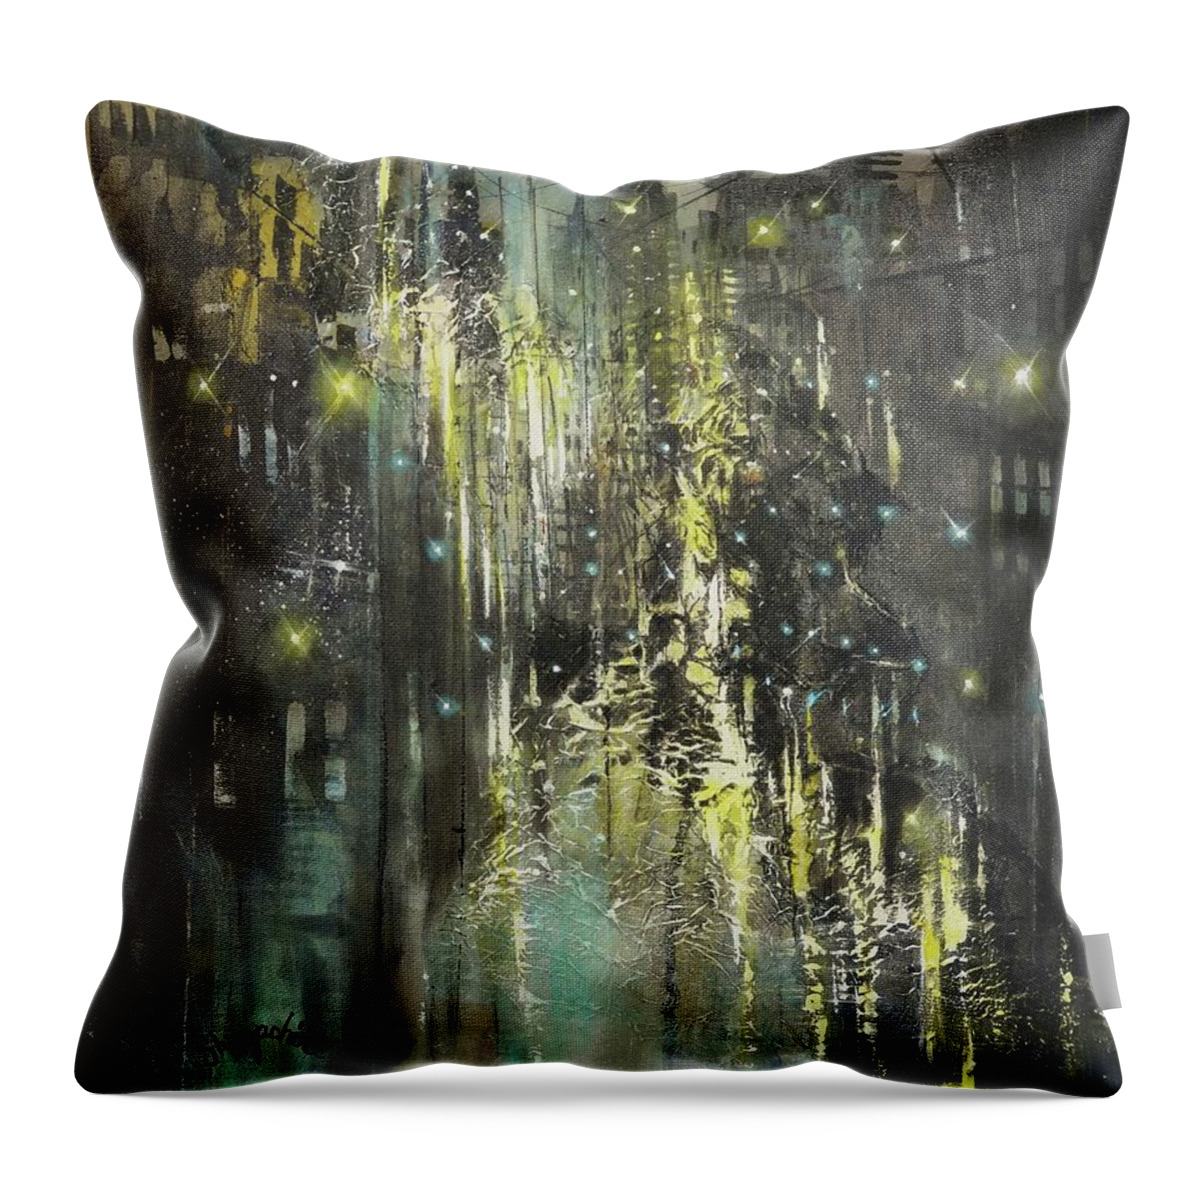 Abstract; Abstract Expressionist; Contemporary Art; Tom Shropshire Painting; Shades Of Blue; Modern Art; New York City; Nyc; Lou Reed Song Dirty Boulevard Throw Pillow featuring the painting Dirty Boulevard by Tom Shropshire